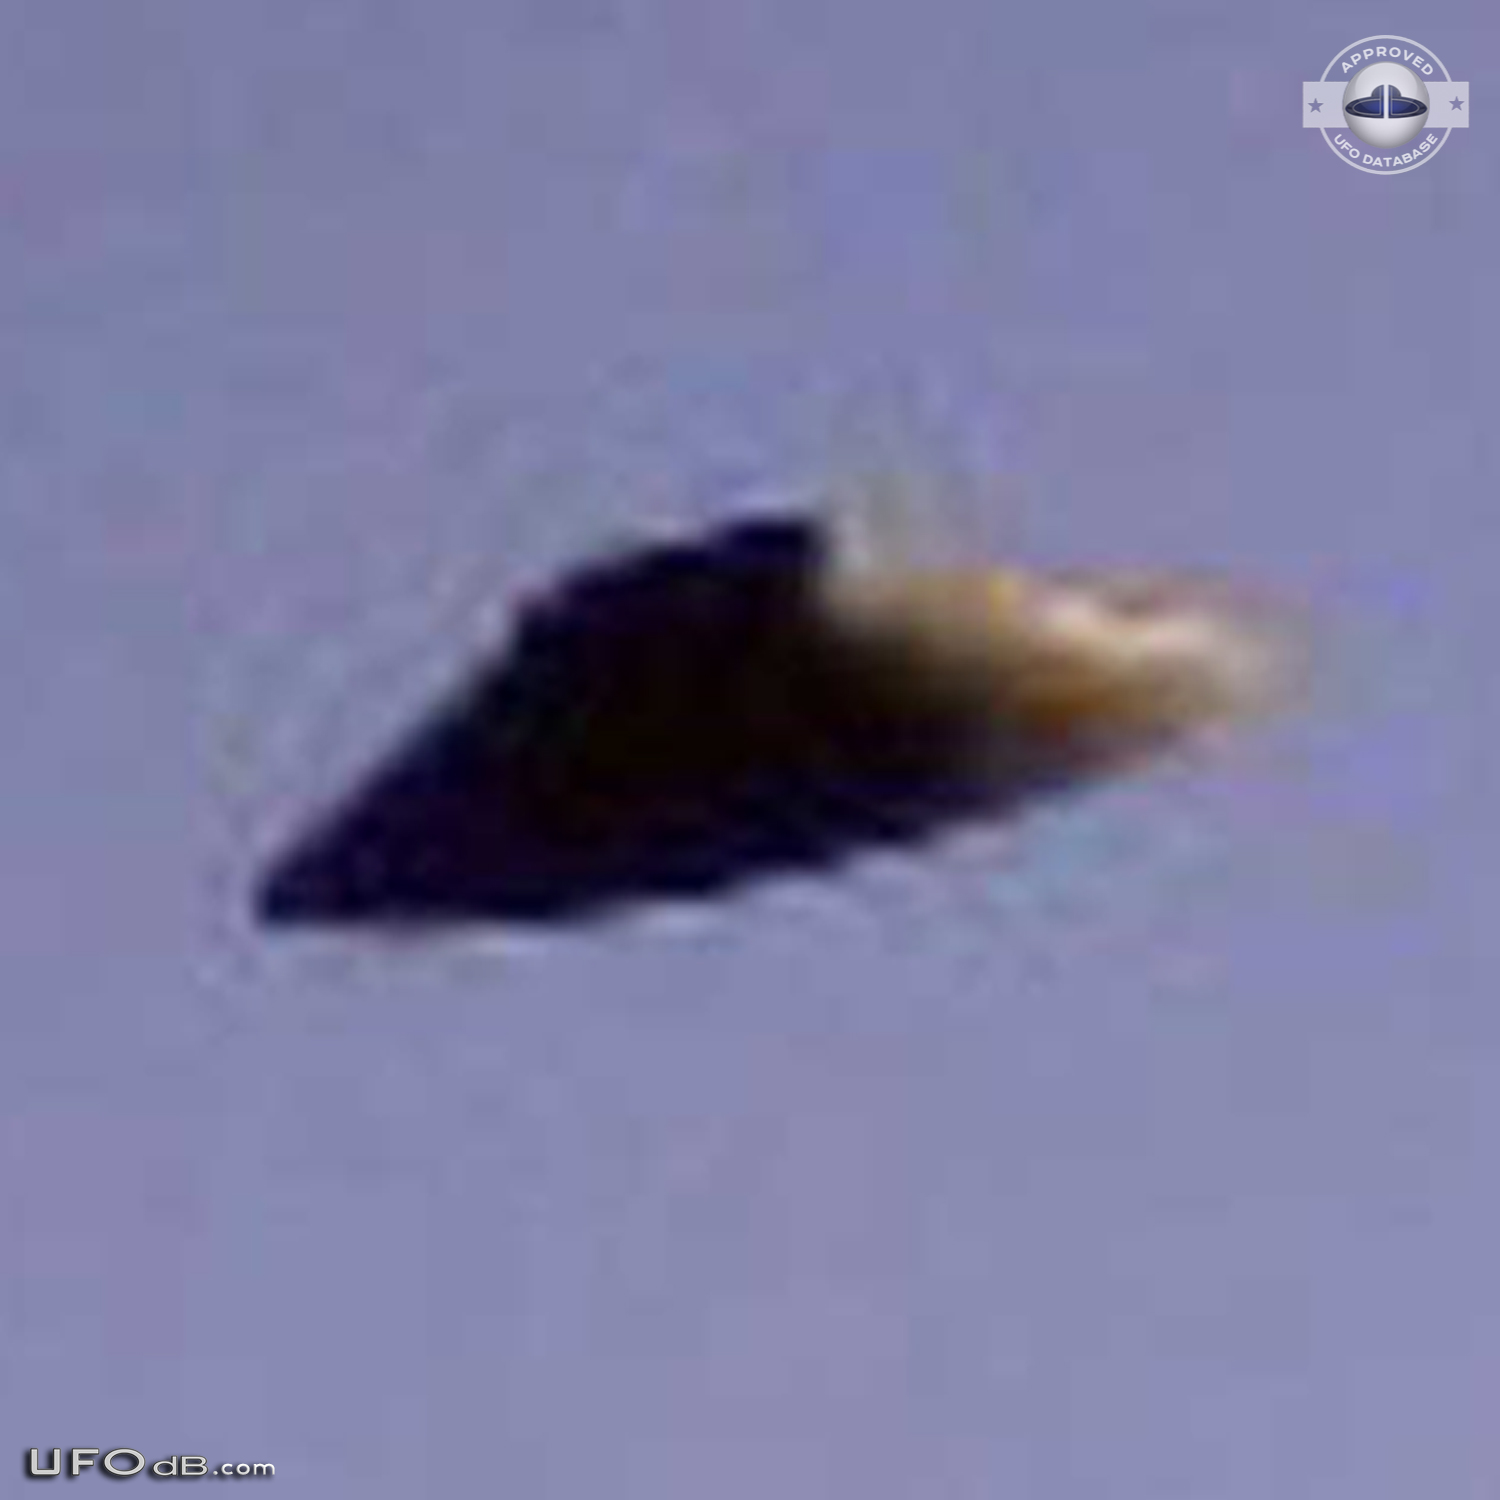 UFO Pictures 2009 UFO over San Diego County California United states. UFO Picture #429-4